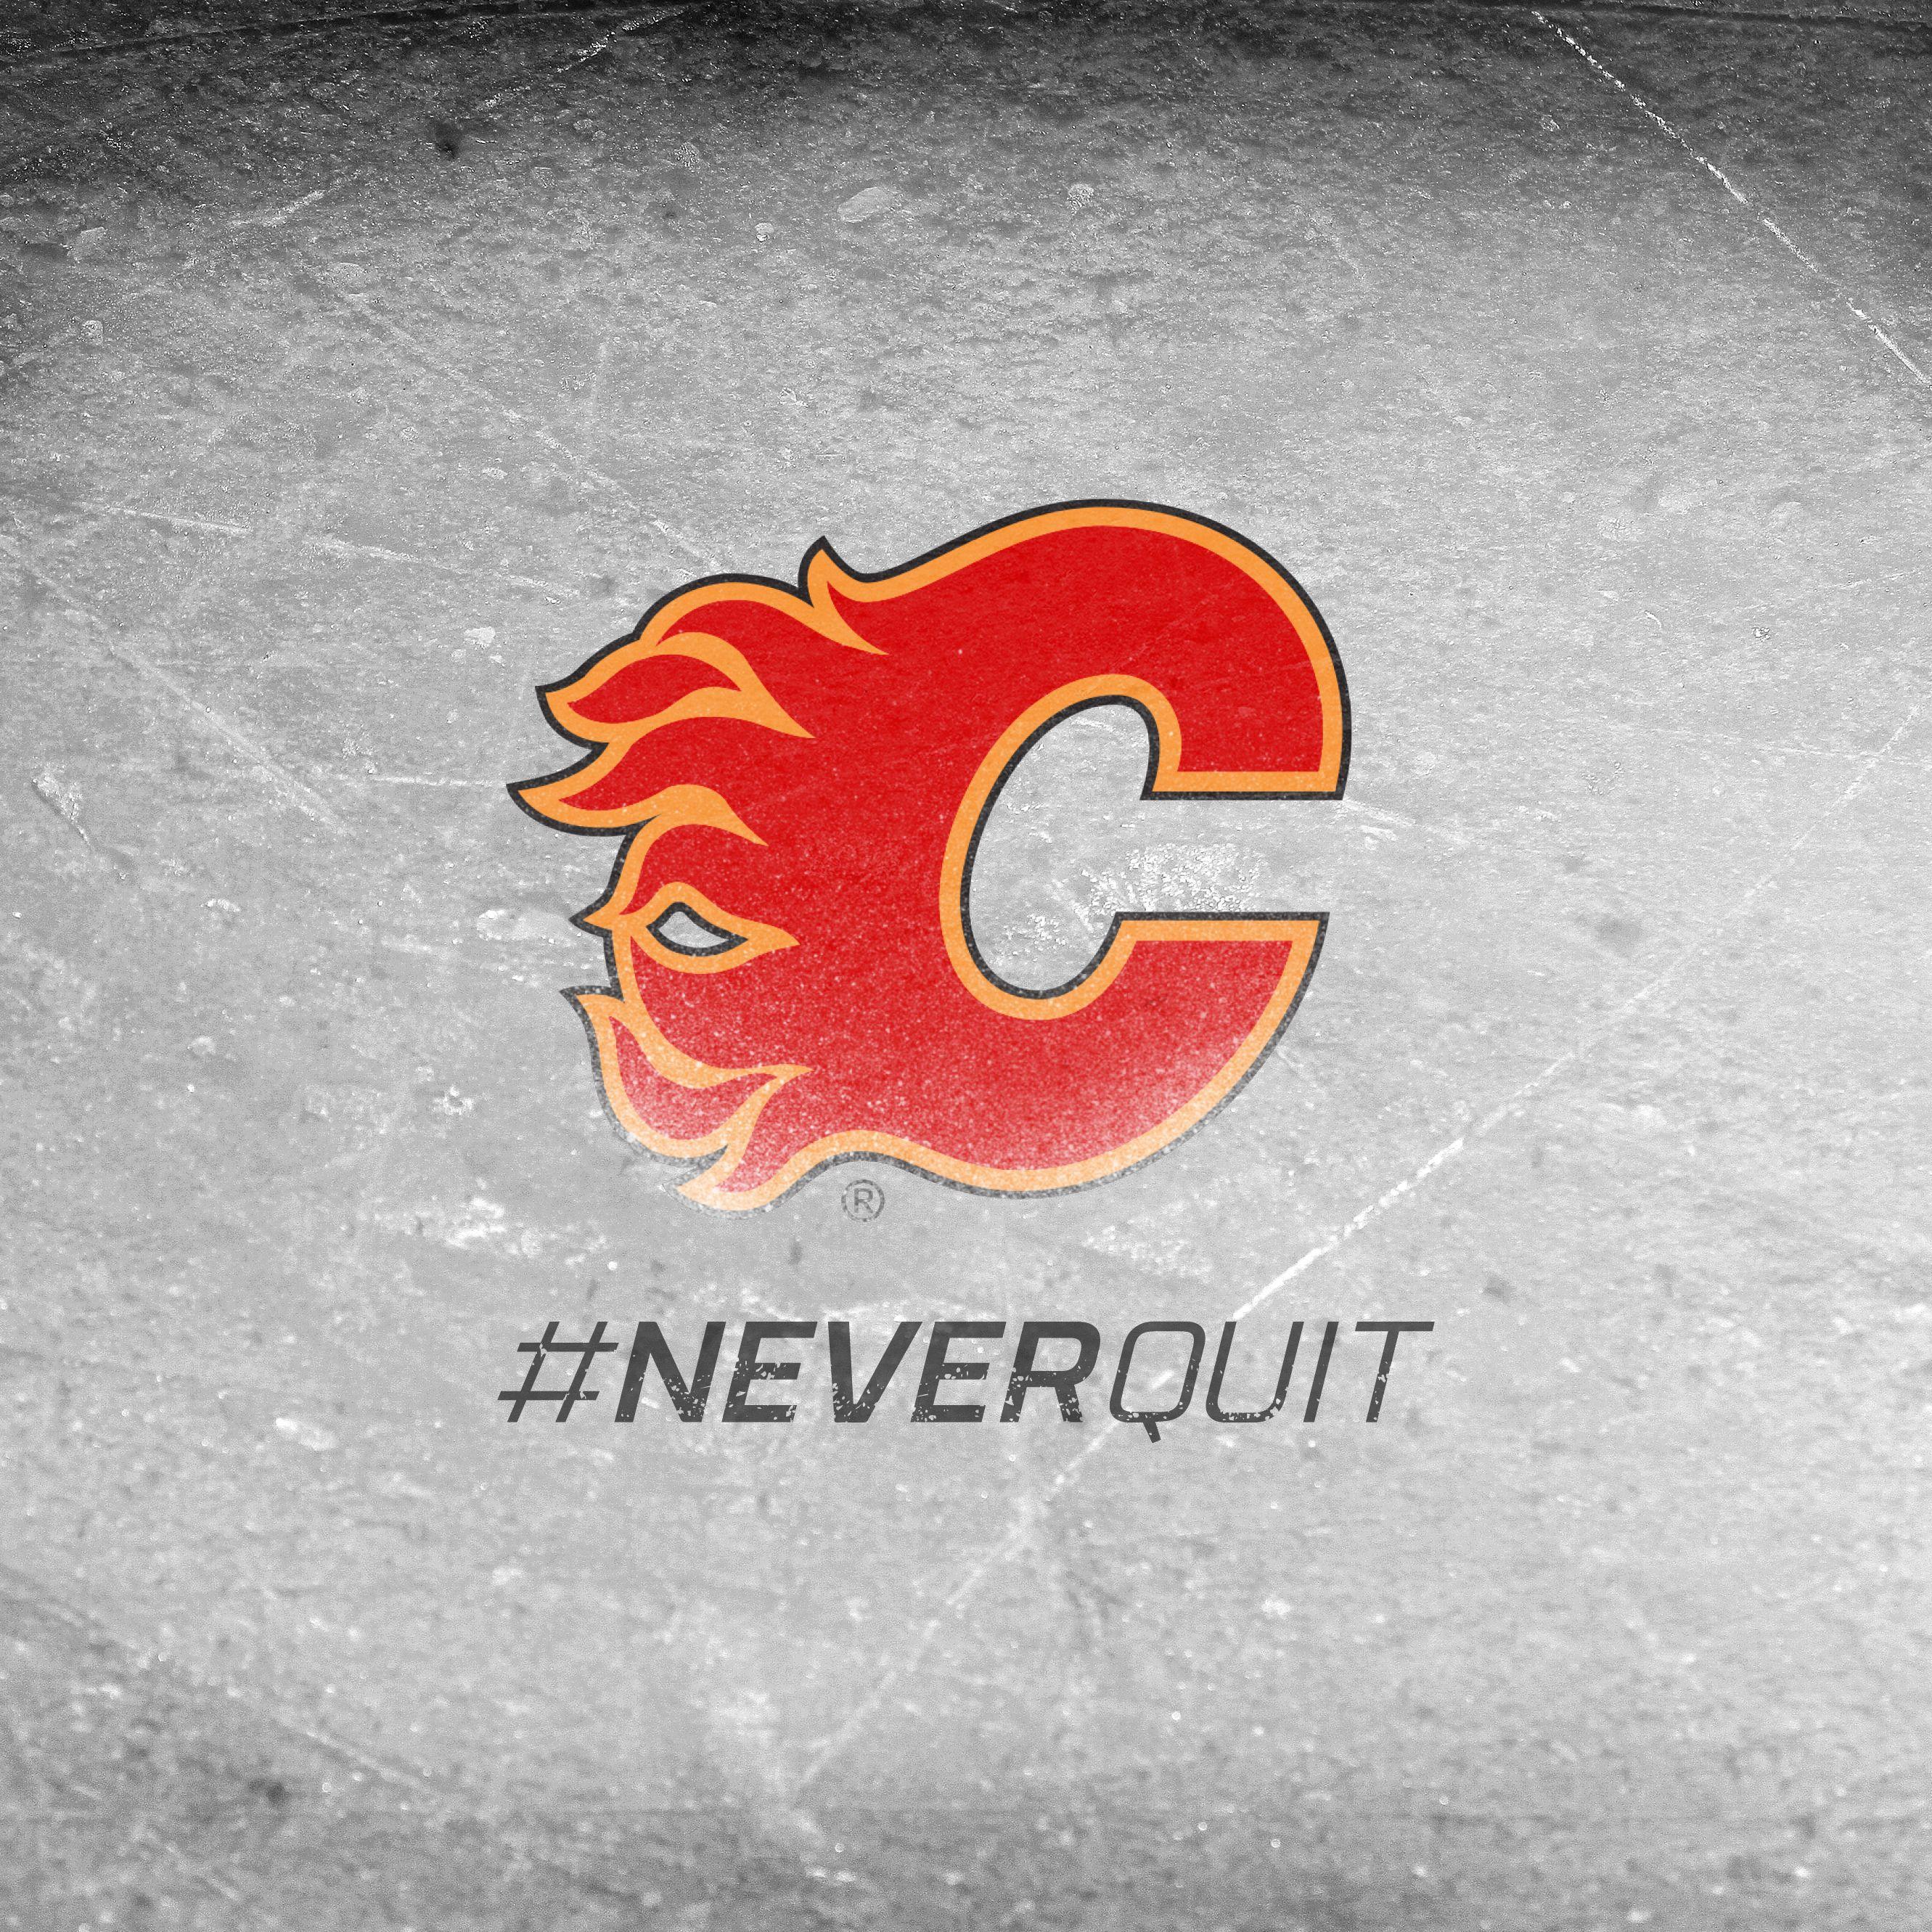 Mobile Calgary Flames Wallpaper. Full HD Picture. Download